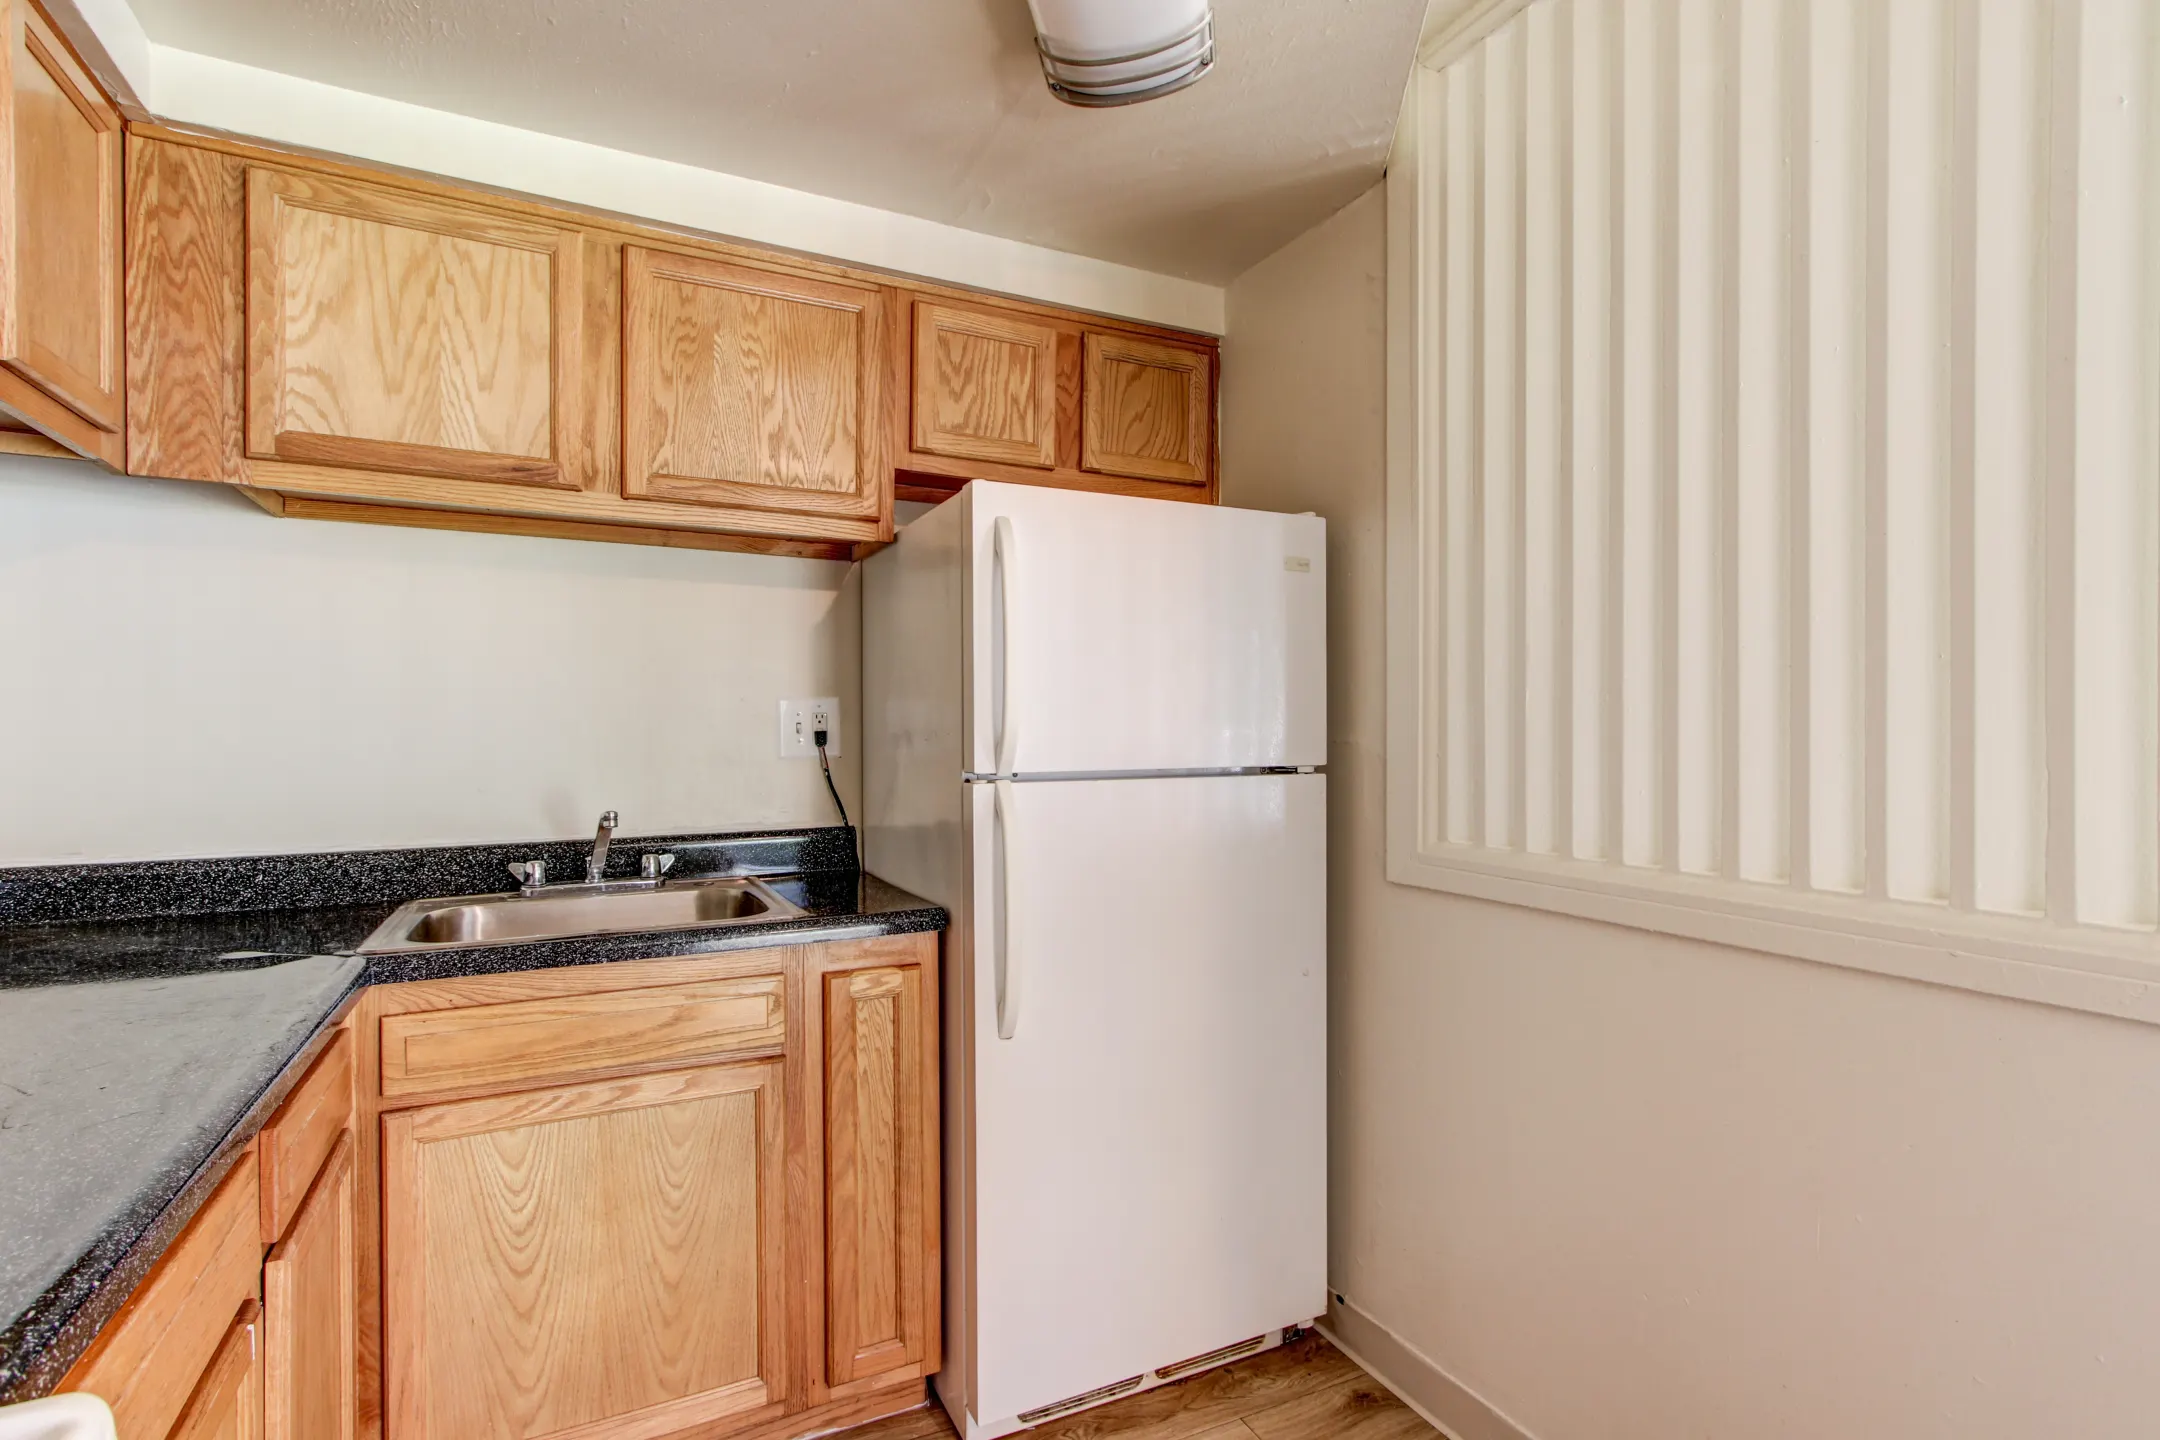 Kitchen - Avenue Apartments - District Heights, MD